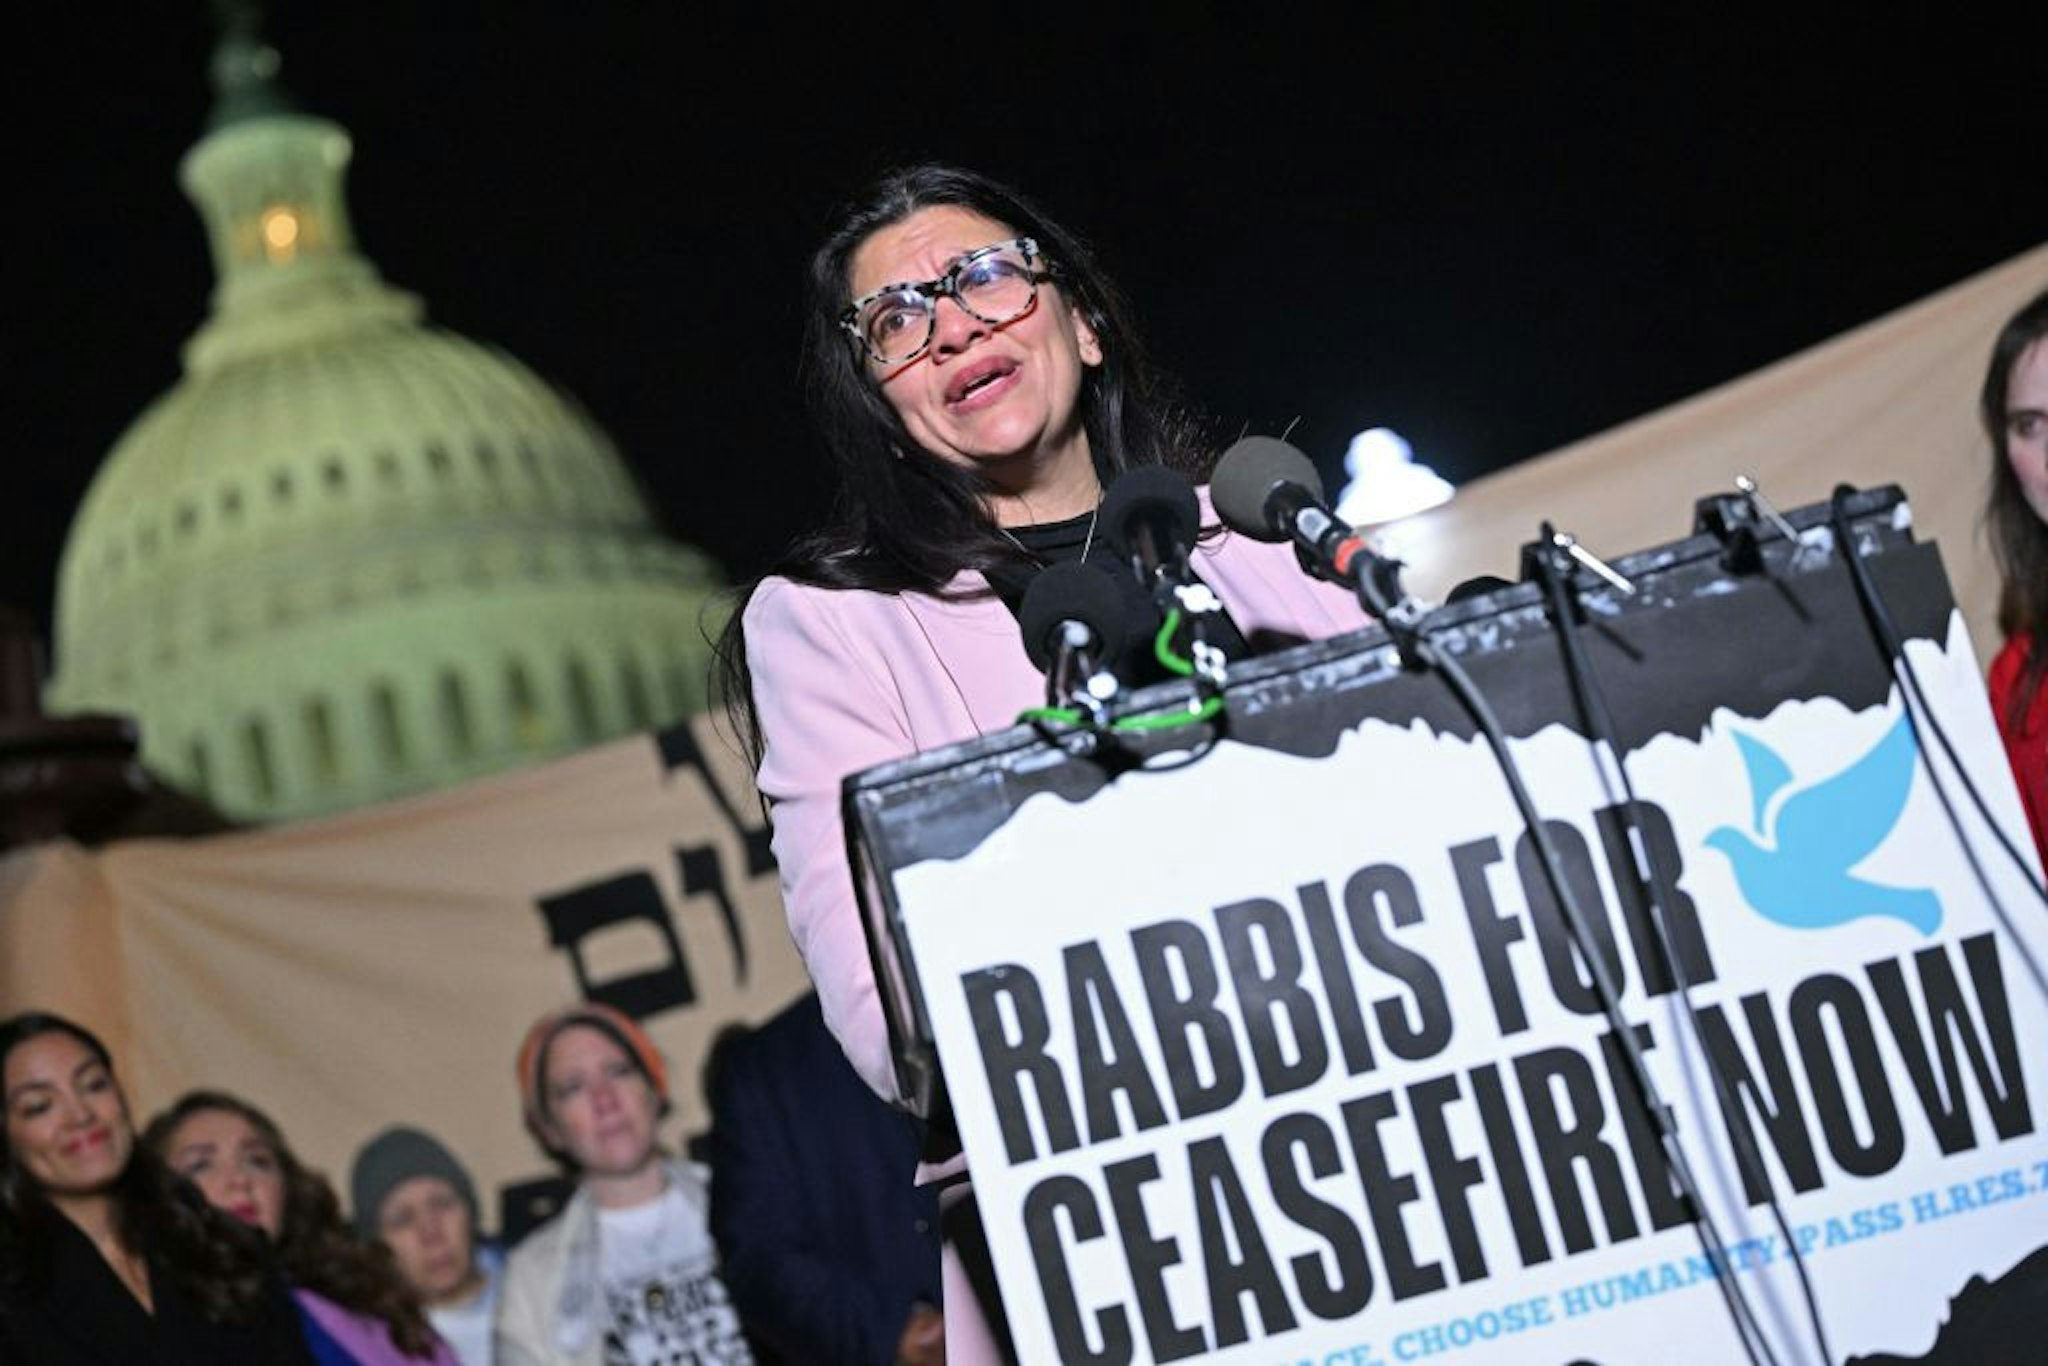 US Representative Rashida Tlaib D-MI, speaks during a rabbis news conference calling for a ceasefire between Israel and Hamas, on Capitol Hill in Washington, DC, on November 13, 2023. Thousands of civilians, both Palestinians and Israelis, have died since October 7, 2023, after Palestinian Hamas militants based in the Gaza Strip entered southern Israel in an unprecedented attack triggering a war declared by Israel on Hamas with retaliatory bombings on Gaza. (Photo by Mandel NGAN / AFP) (Photo by MANDEL NGAN/AFP via Getty Images)